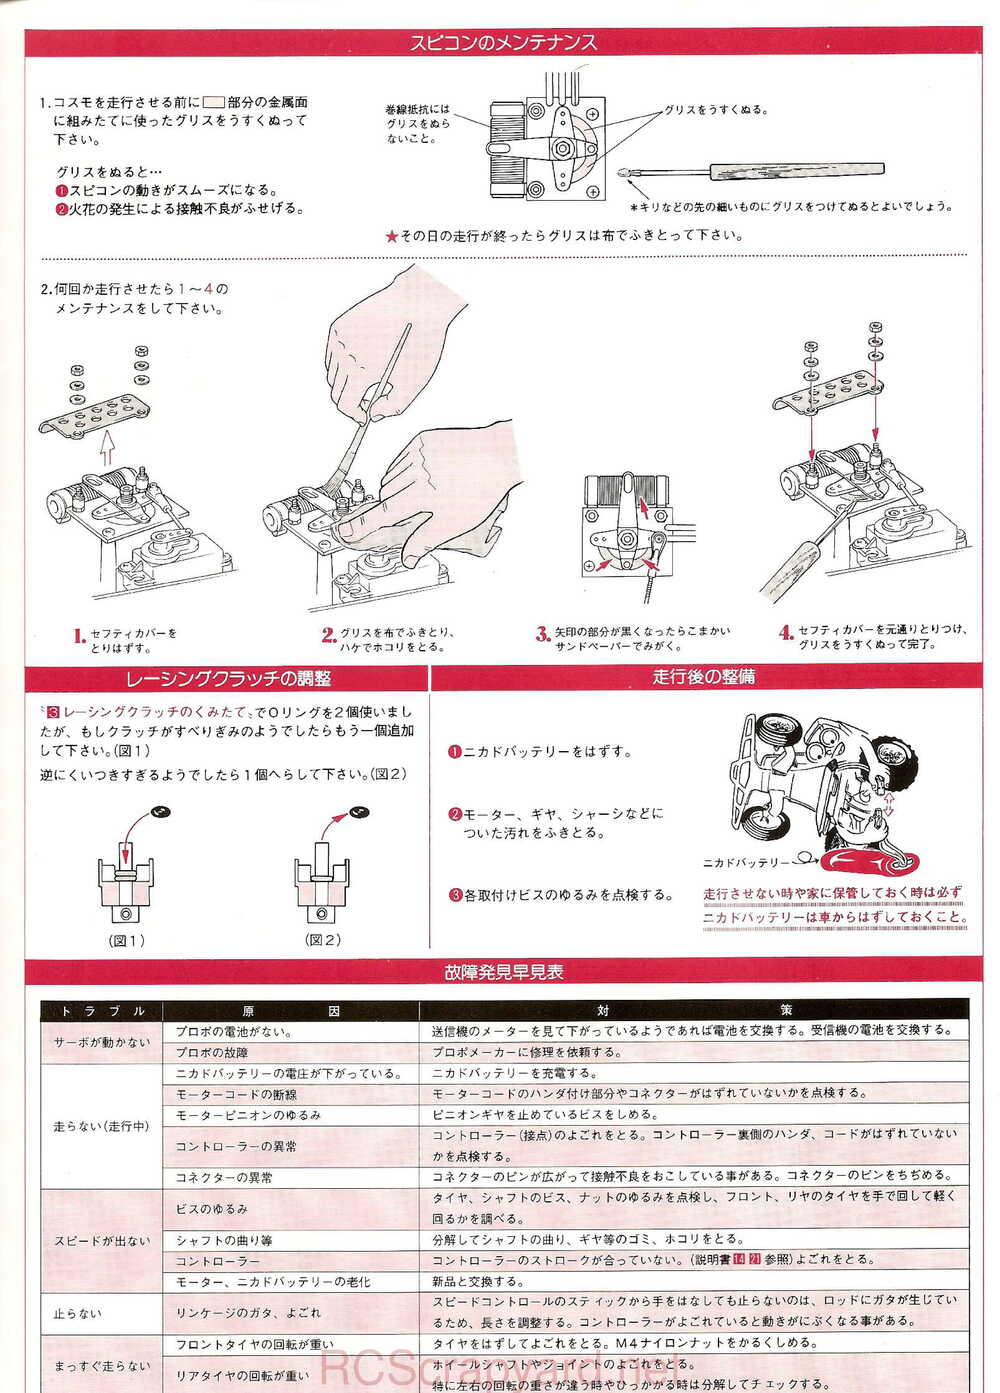 Kyosho - 3084 - Cosmo - Manual - Page 15